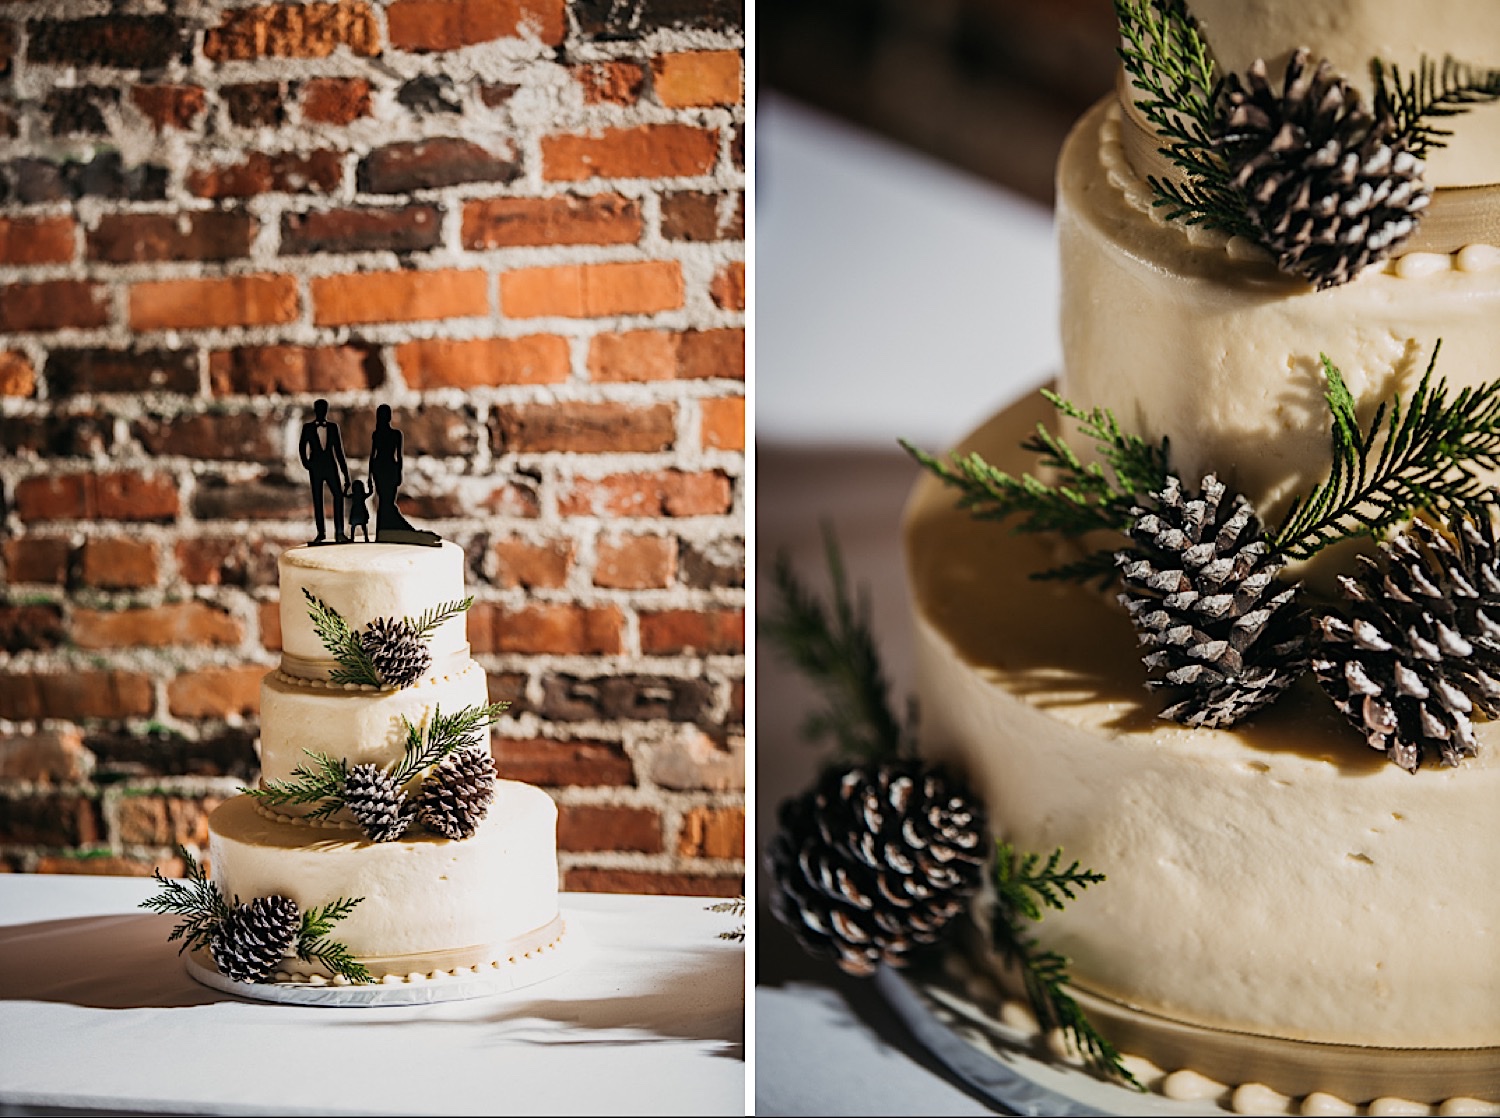 3-tier-cake-with-pinecones-and-family-topper